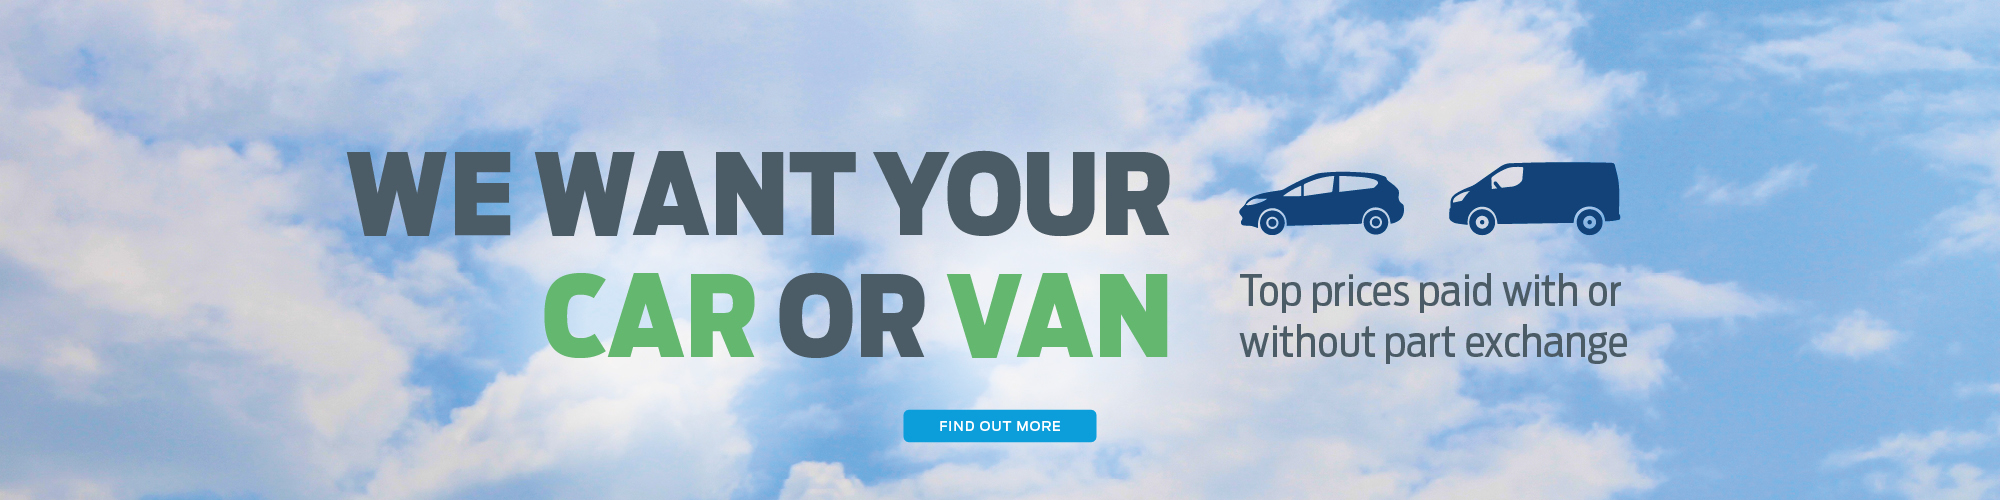 We want your new car or van